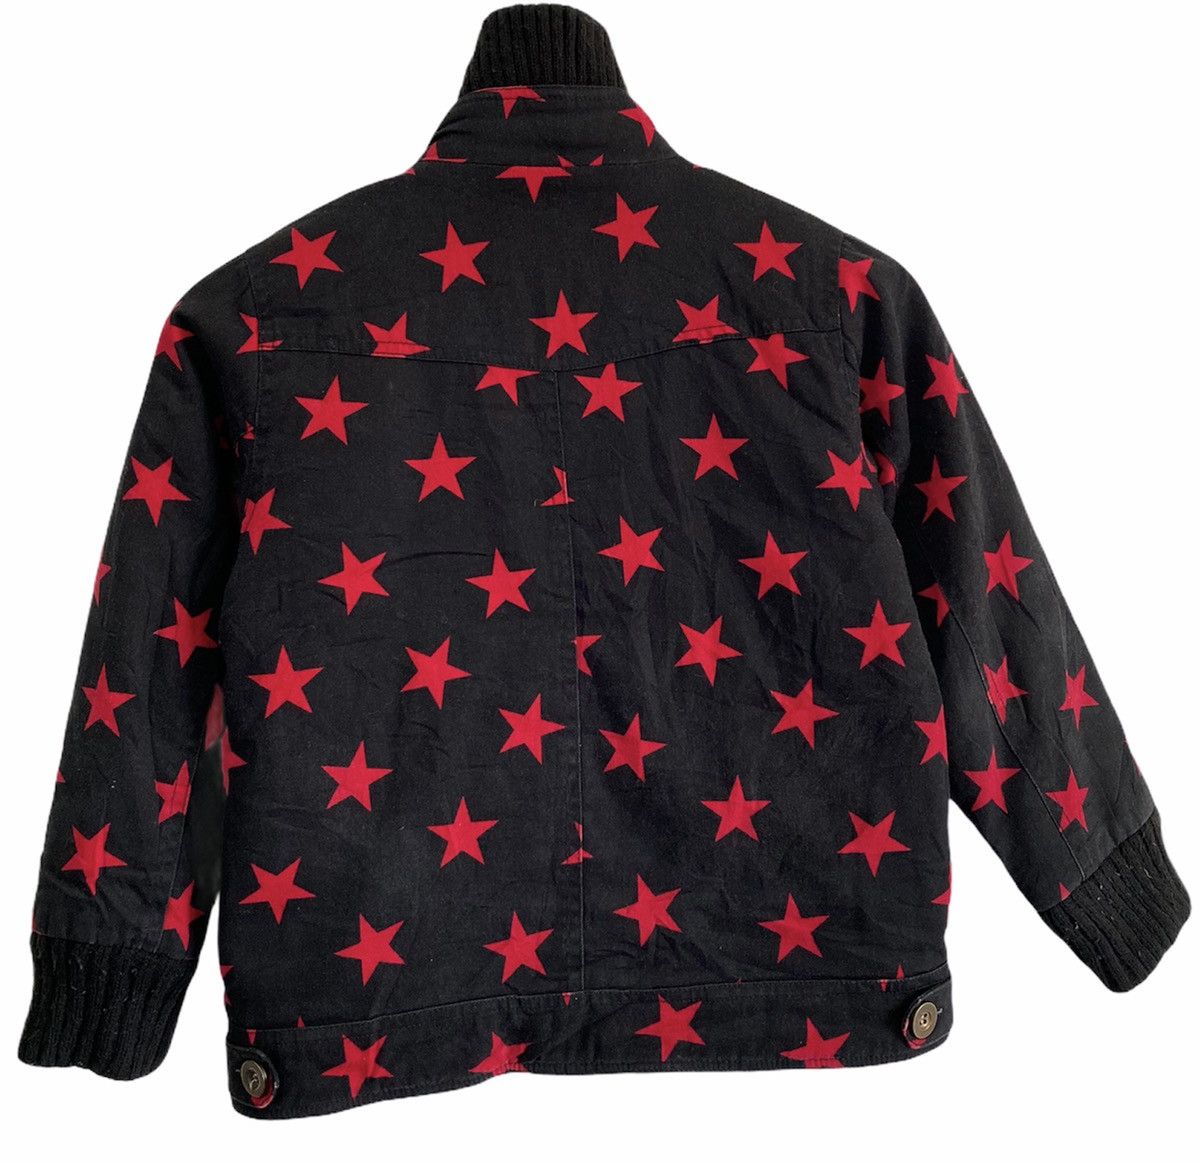 Vintage Military Star Hysteric Glamour Style M65 Kid Jacket - 3